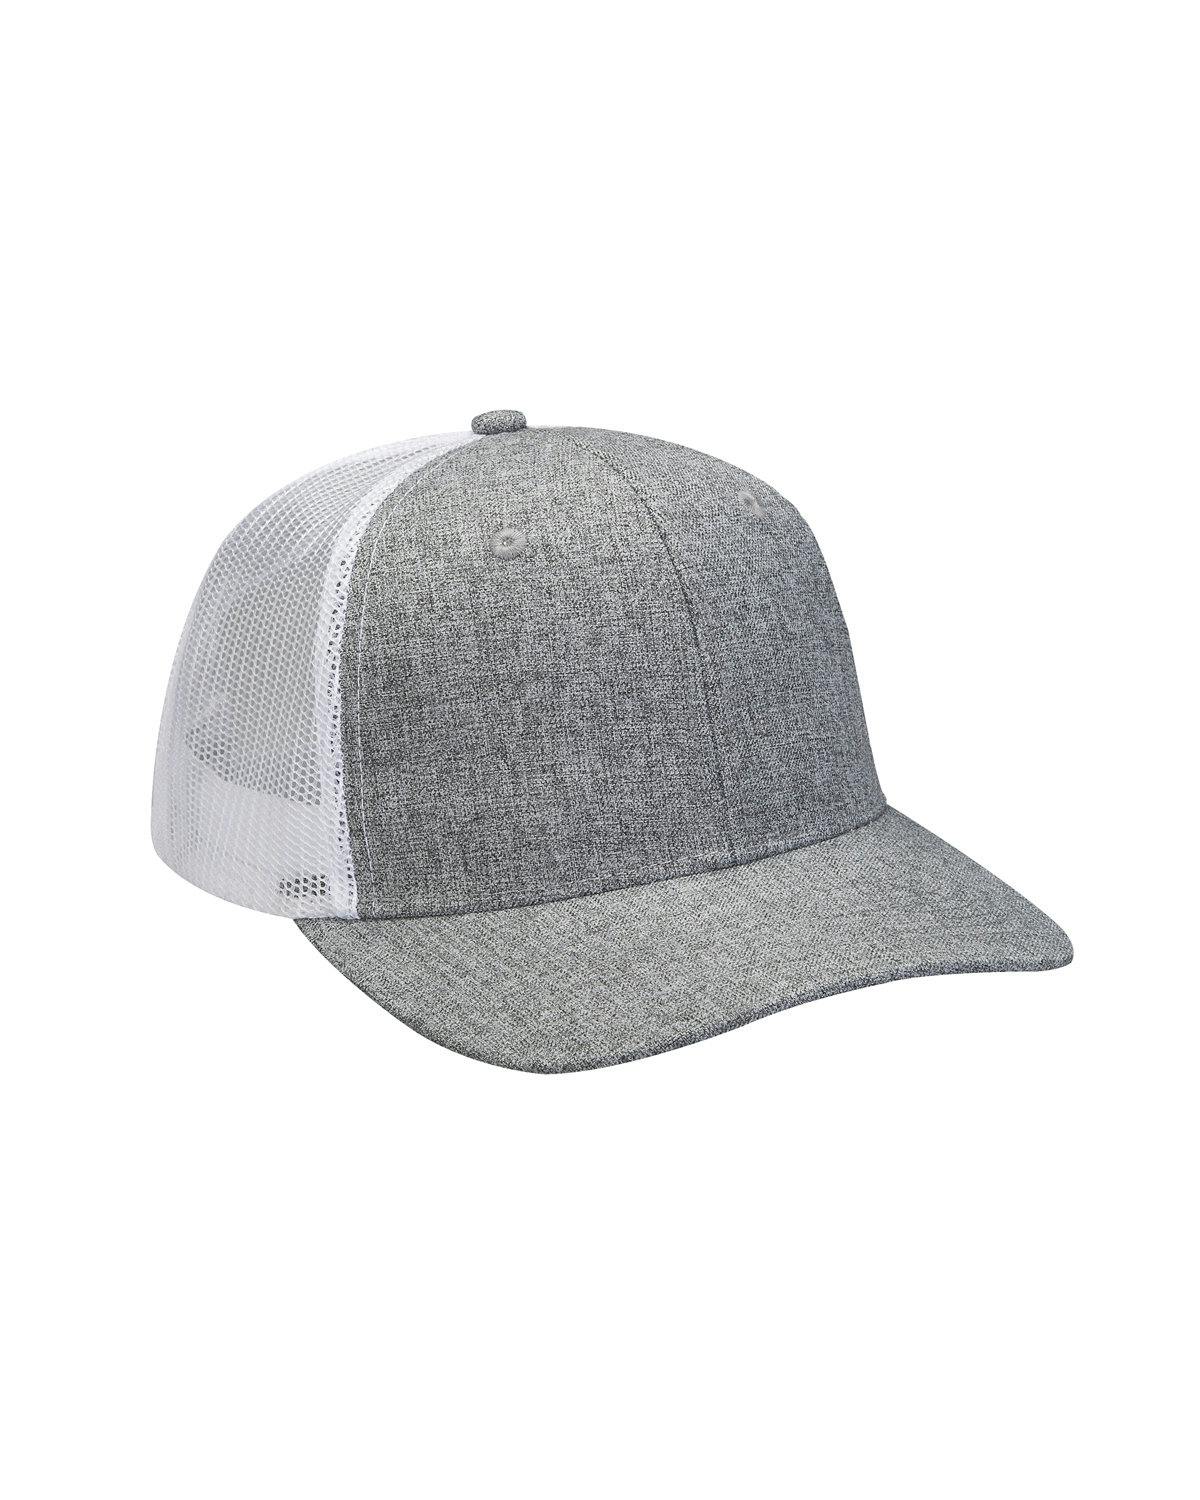 Image for Heather Woven/Soft Mesh Trucker Style Cap